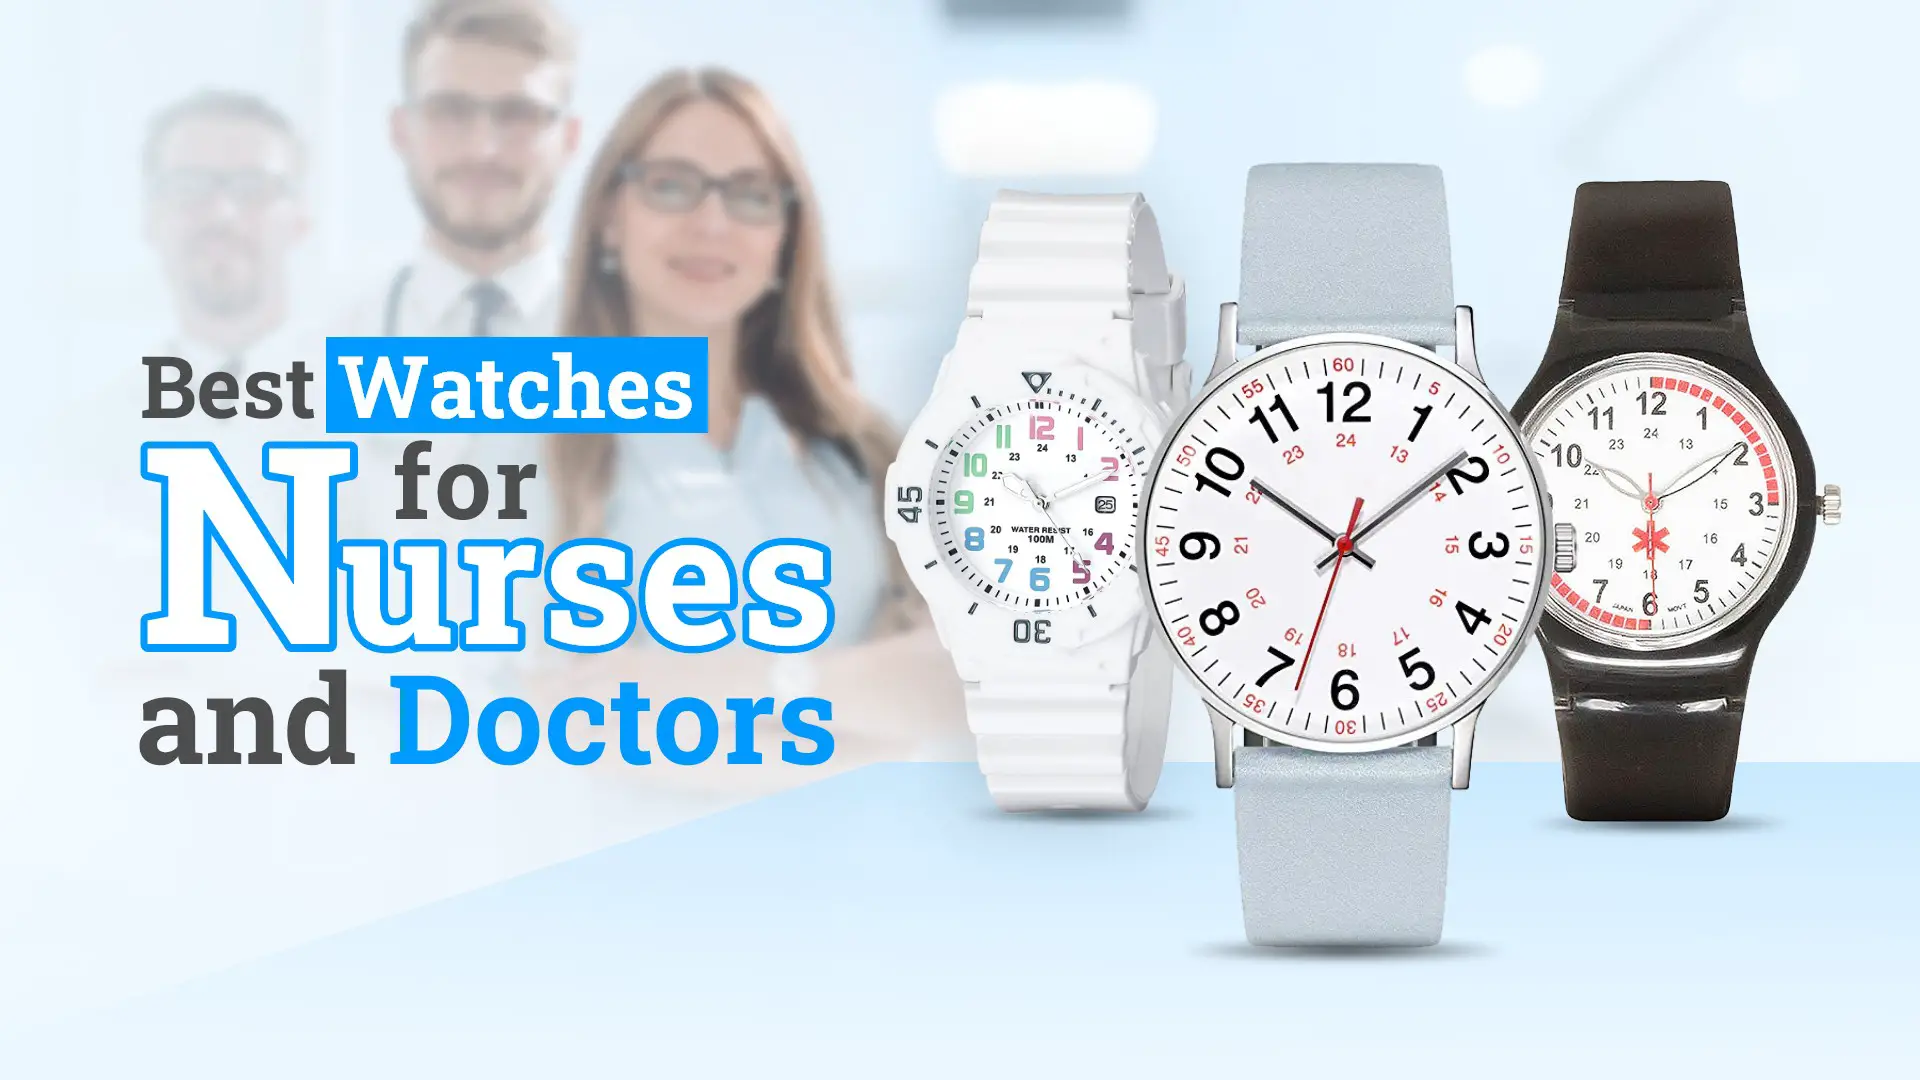 13 Best Watches for Nurses and Doctors in 2022